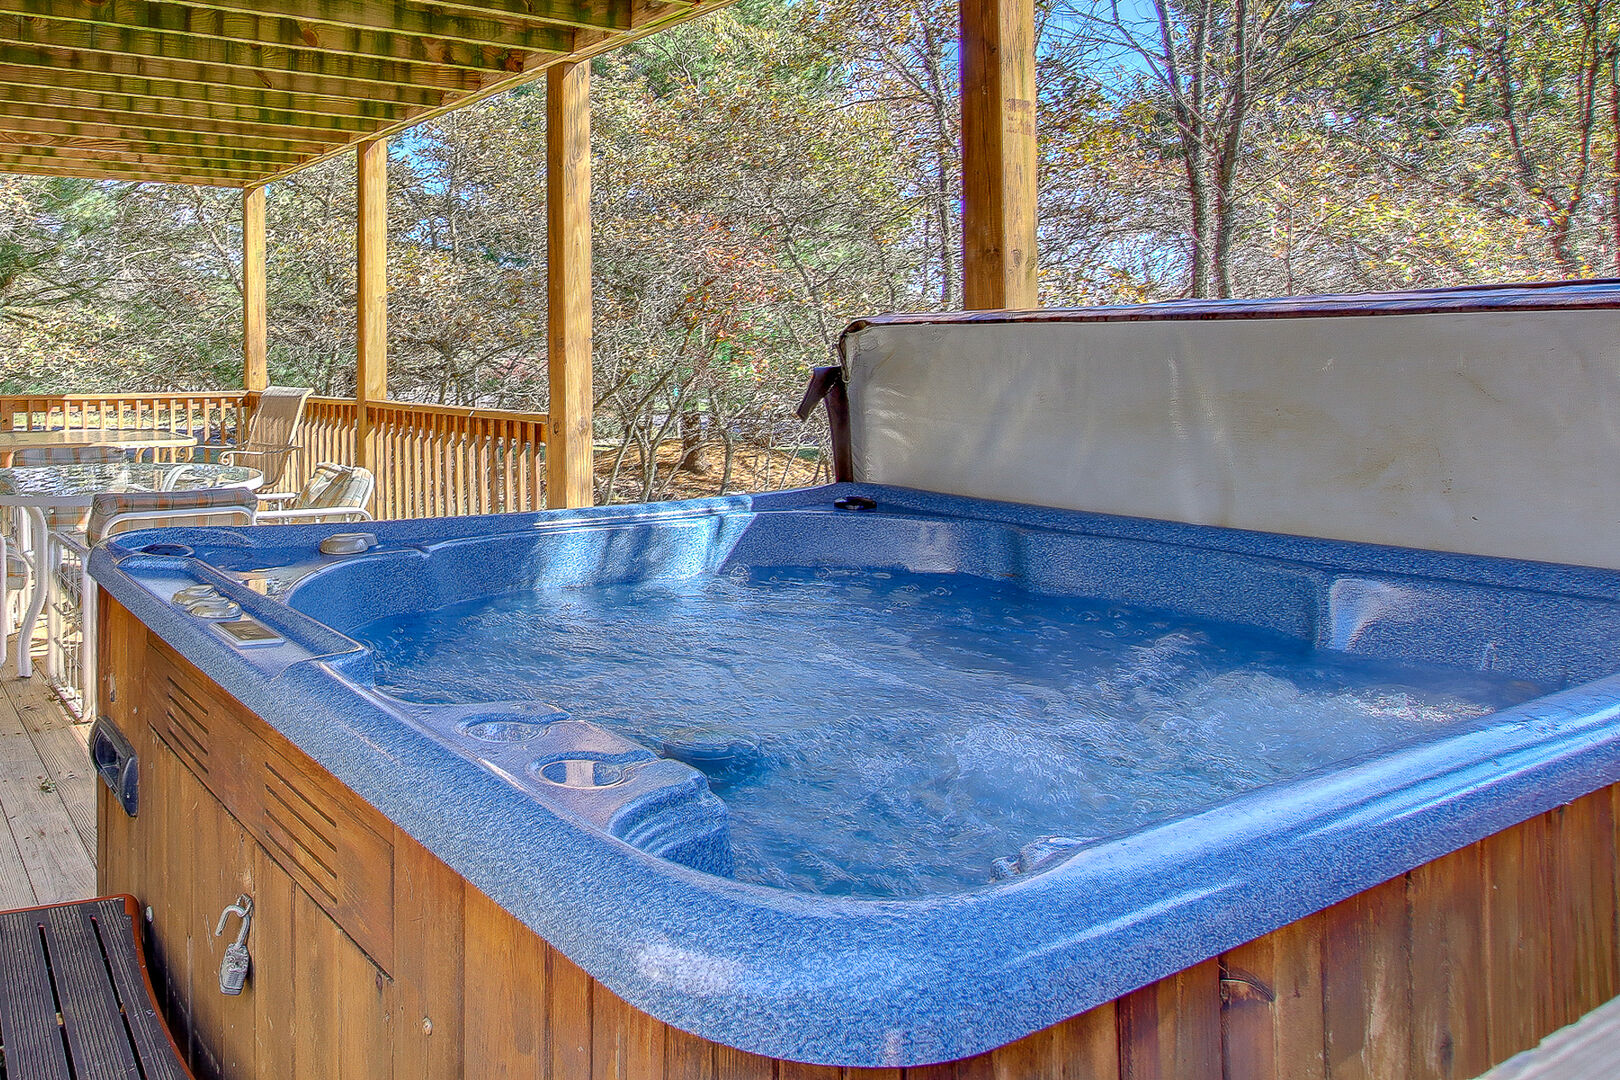 Hot Tub Featured in Backyard of Our Poconos Lake Rental.